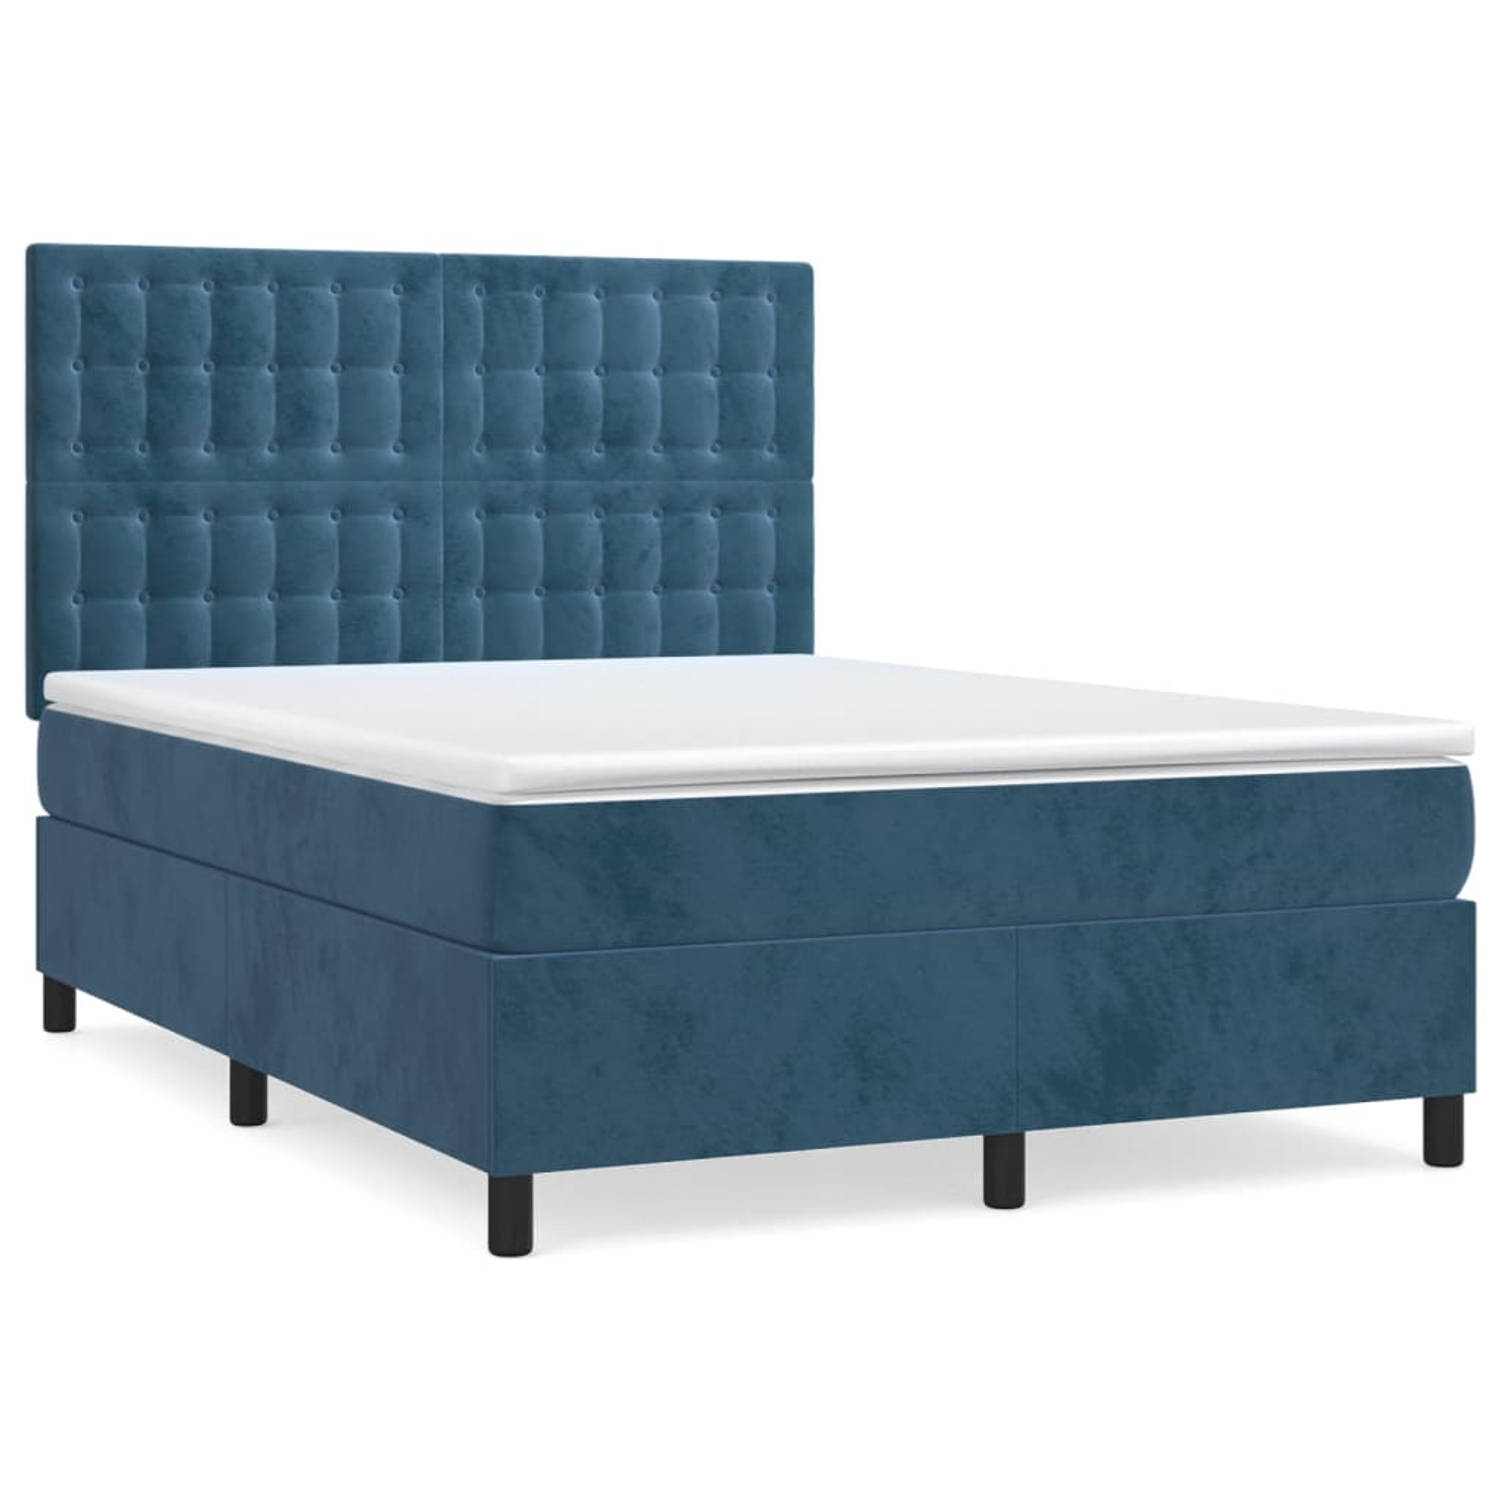 The Living Store Boxspringbed - naam - Bed - 203 x 144 x 118/128 cm - Zacht fluweel